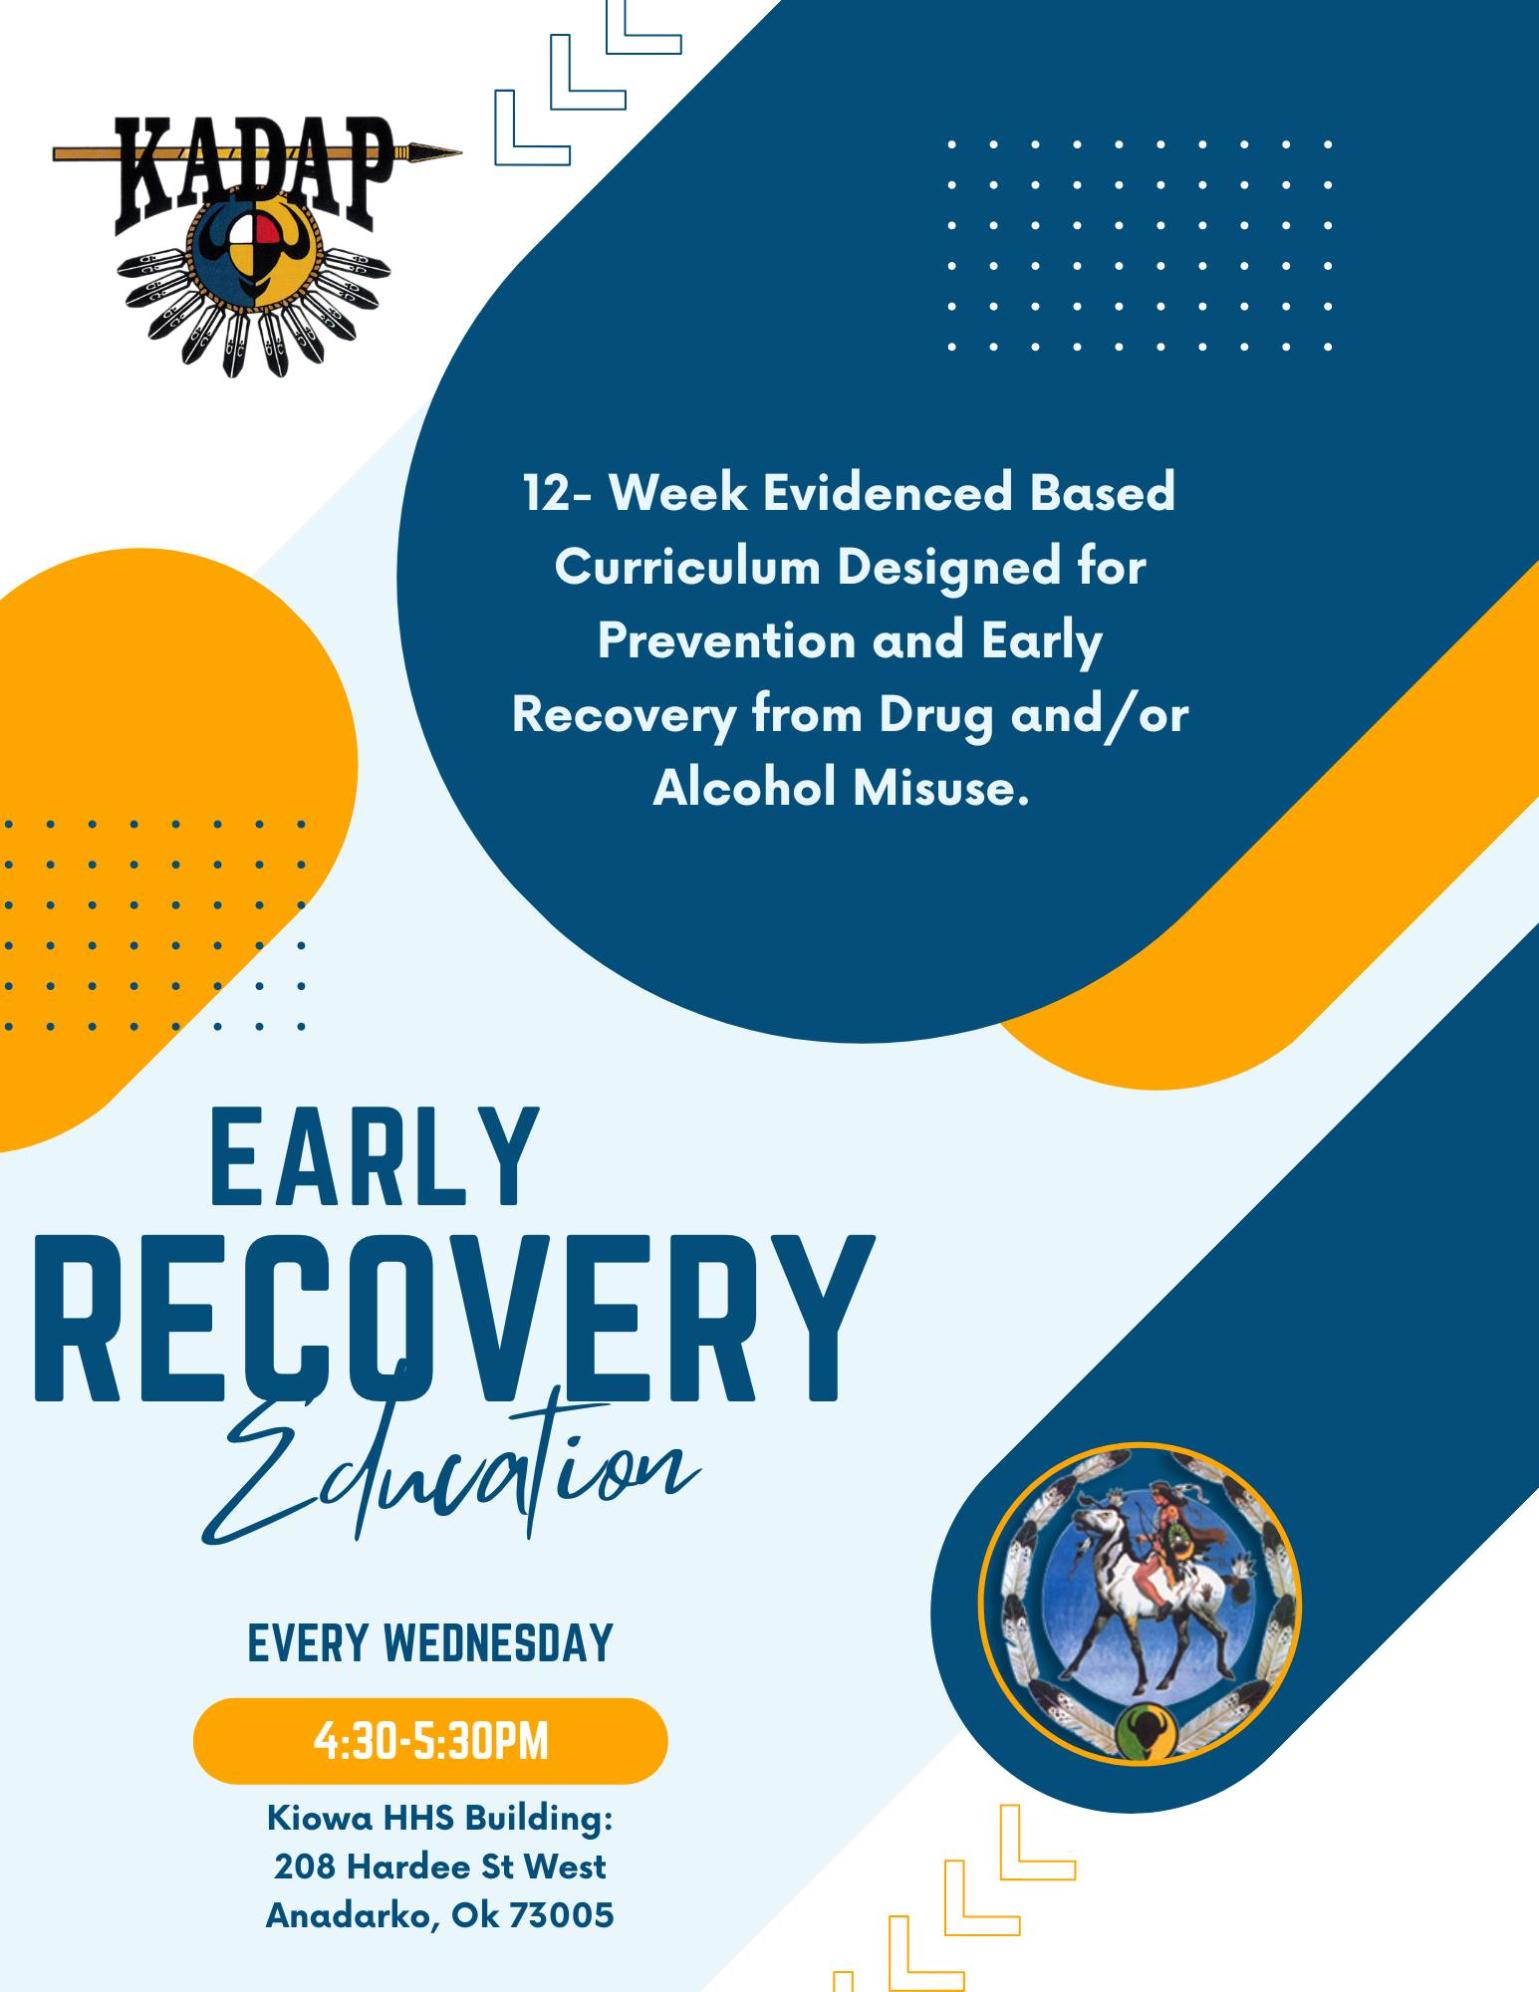 Early Recovery Education